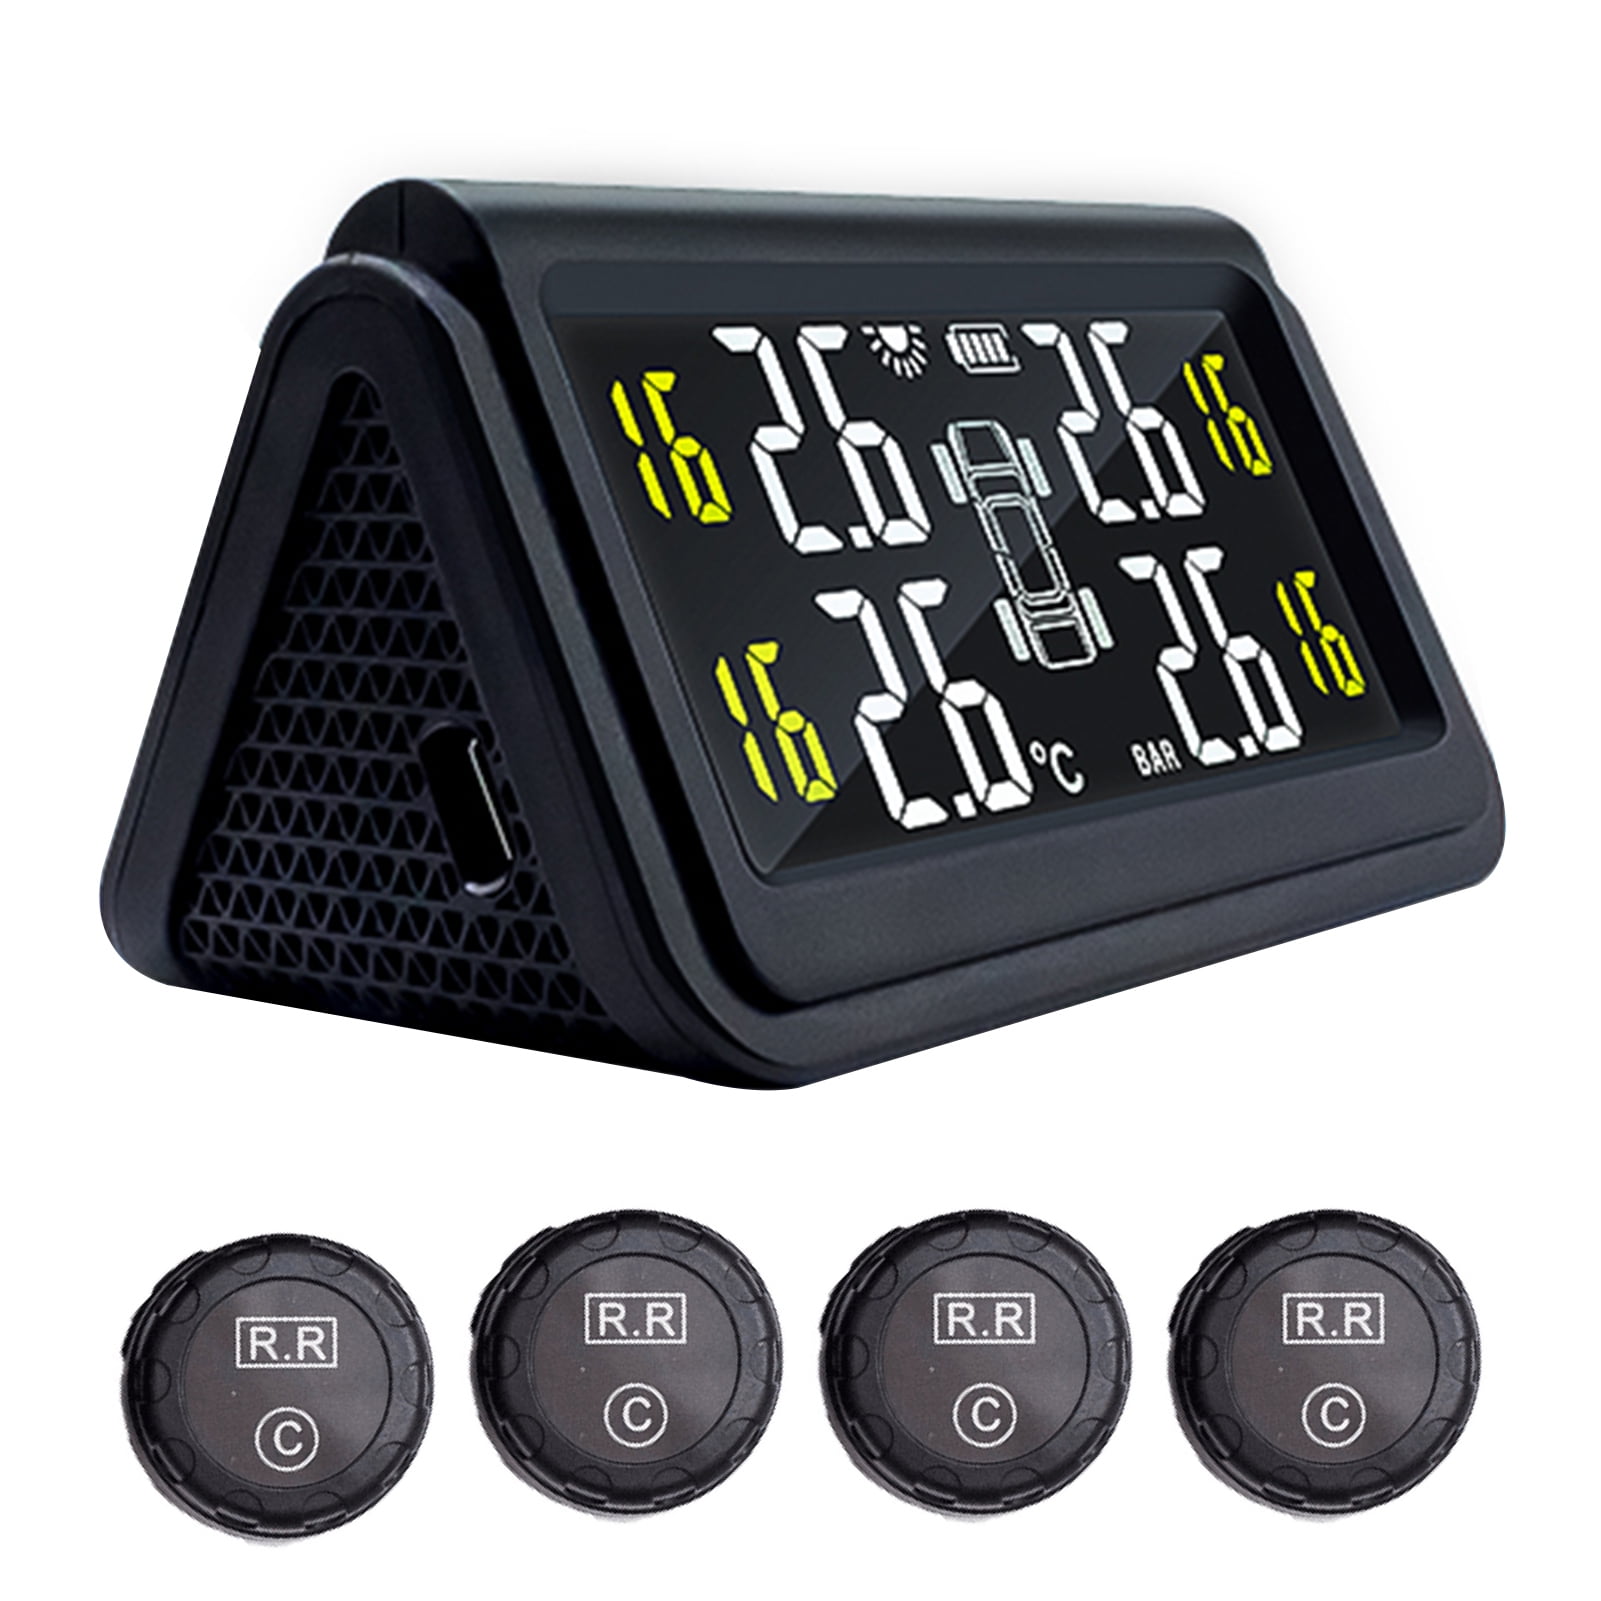 Auto Security Alarm Systems Tire Pressure Monitoring System with 4 External Sensors HD Large Screen Display 4 Tires Pressure and Temperature DEEWAZ Wireless TPMS Solar Powered 